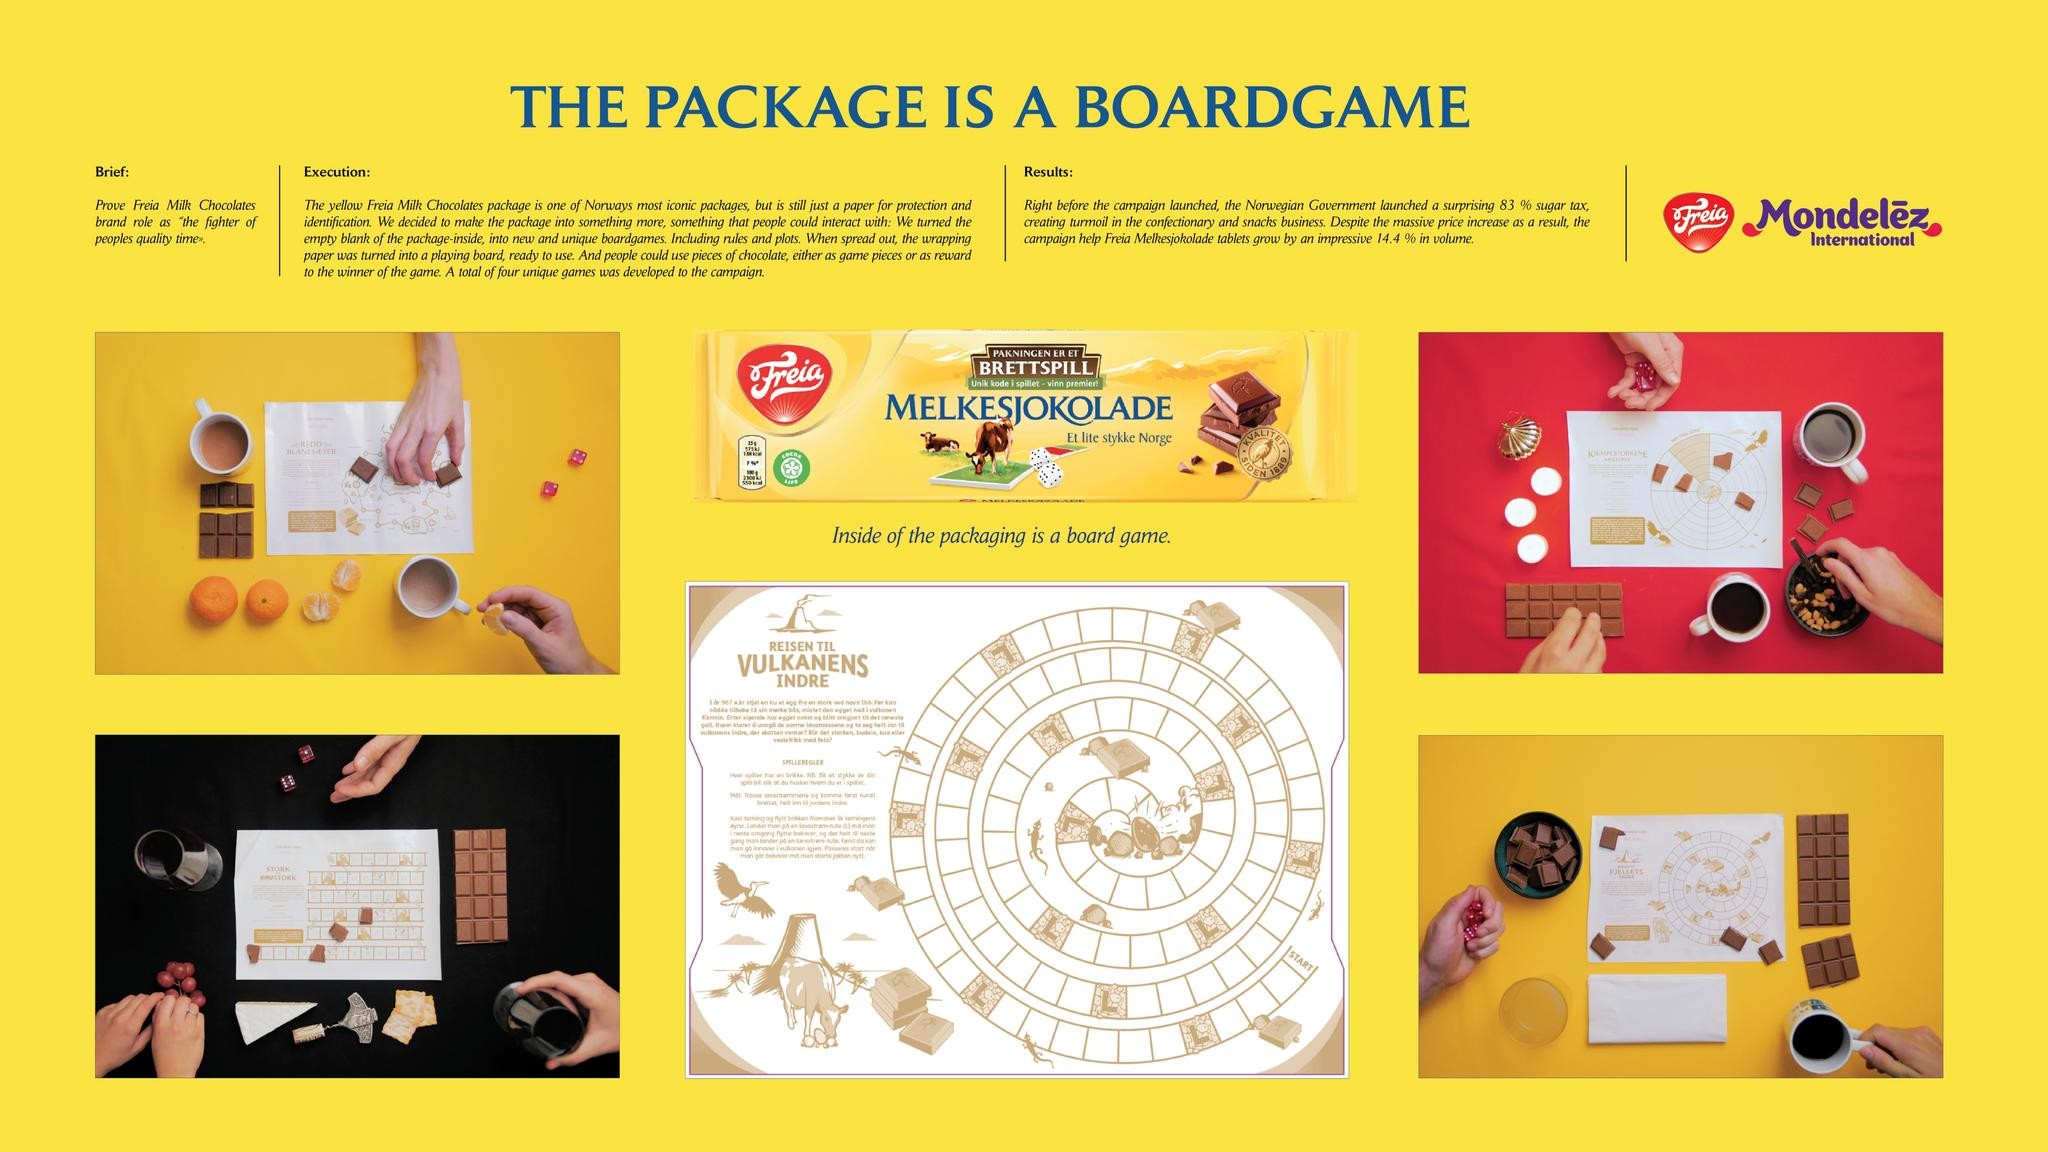 THE PACKAGE IS A BOARDGAME